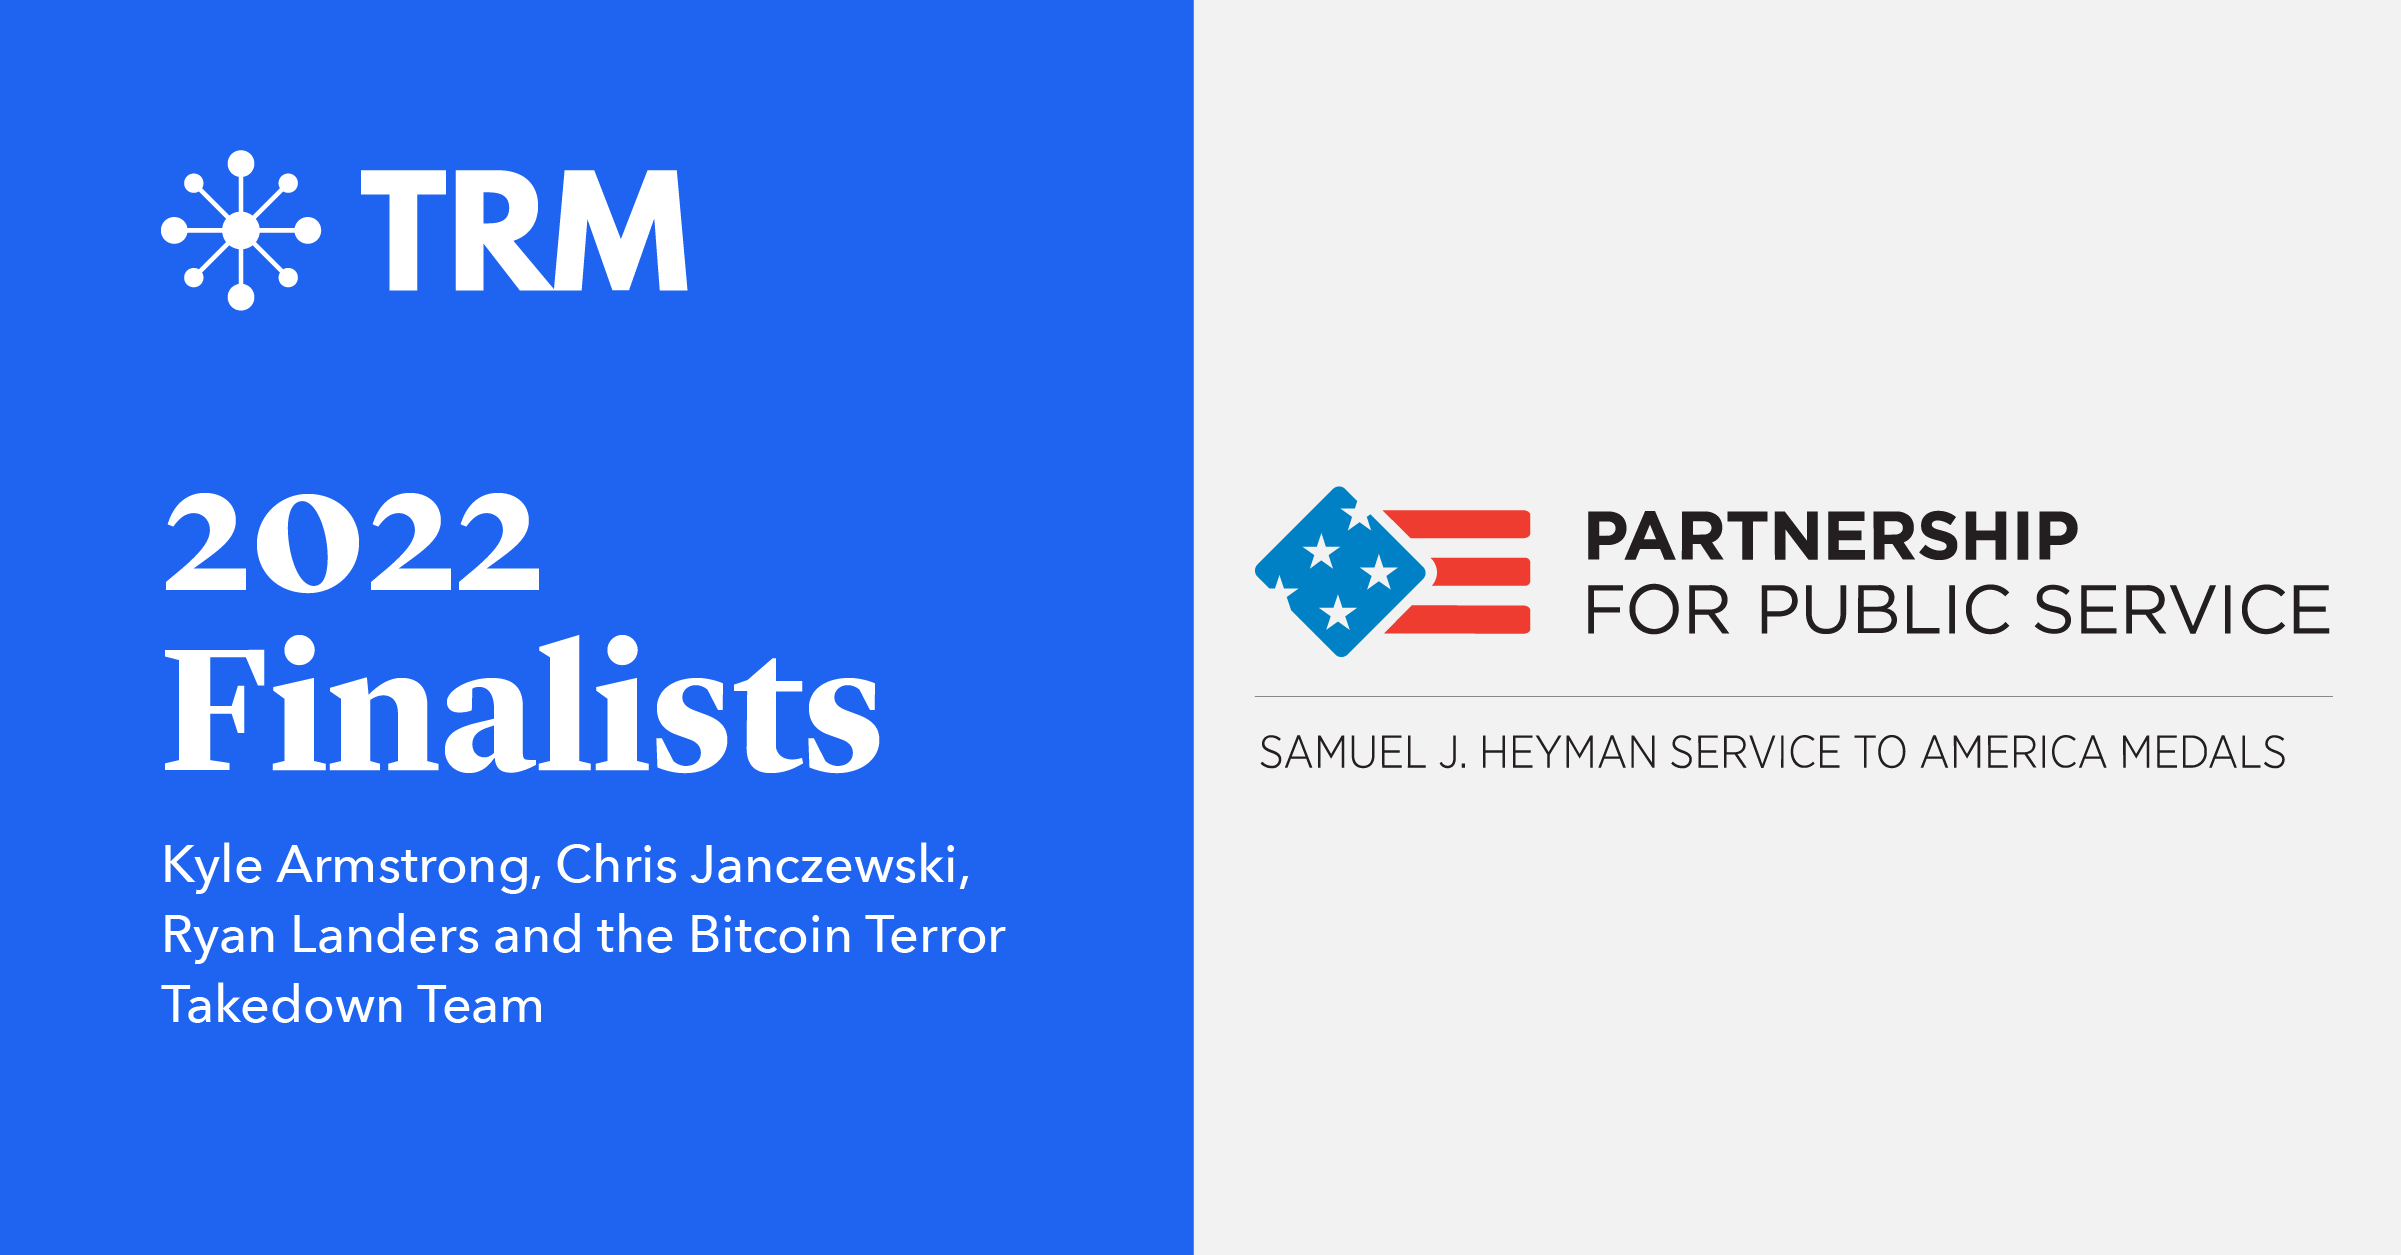 TRM's Kyle Armstrong and Chris Janczewski named finalists for government service award for terror fundraising takedown